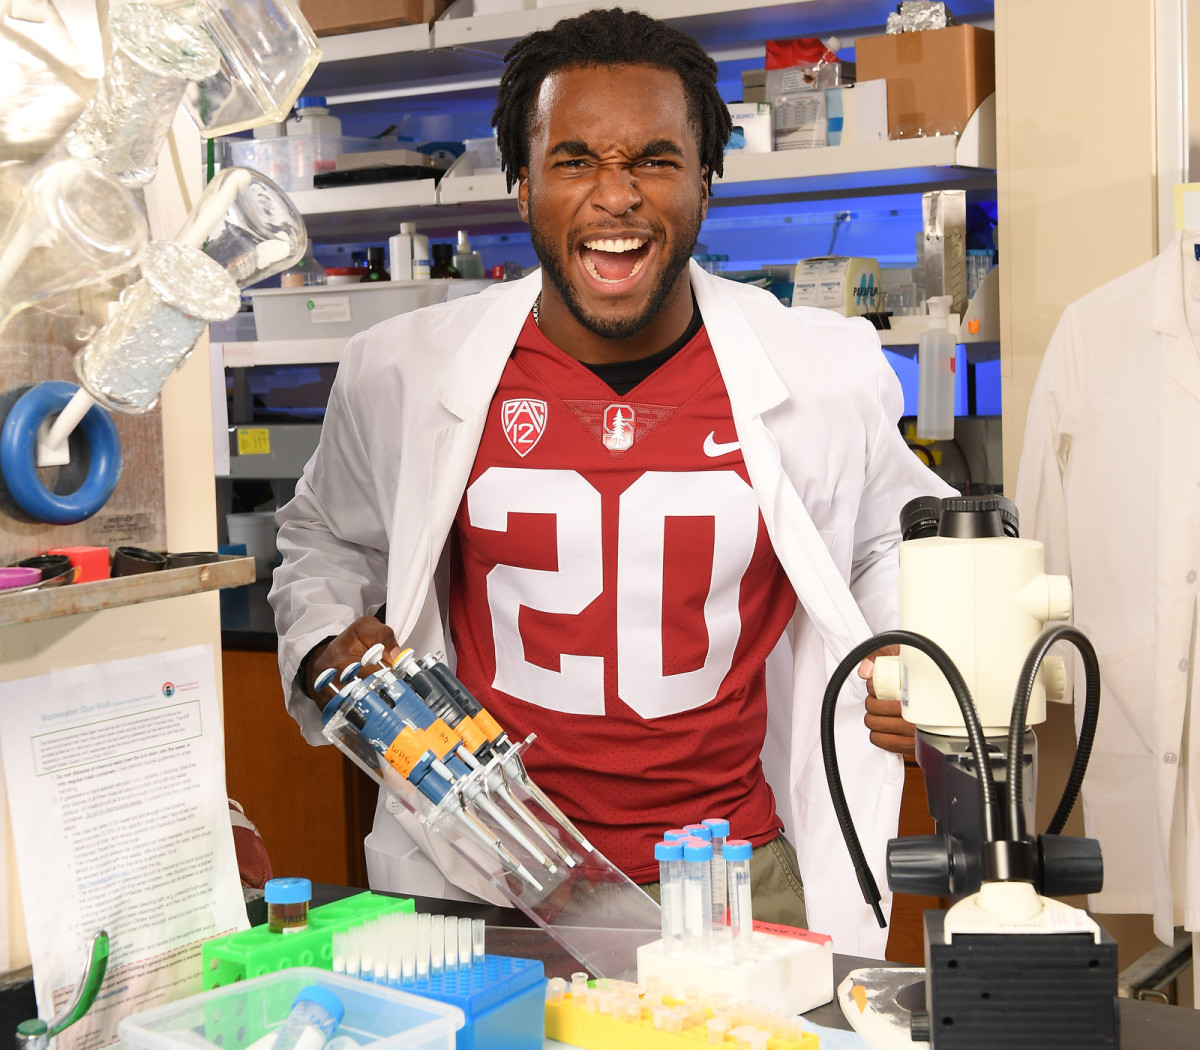 Love's Heisman candidacy doesn't keep him from going largely unnoticed in the stem cell lab where he works a few days per week during the season.